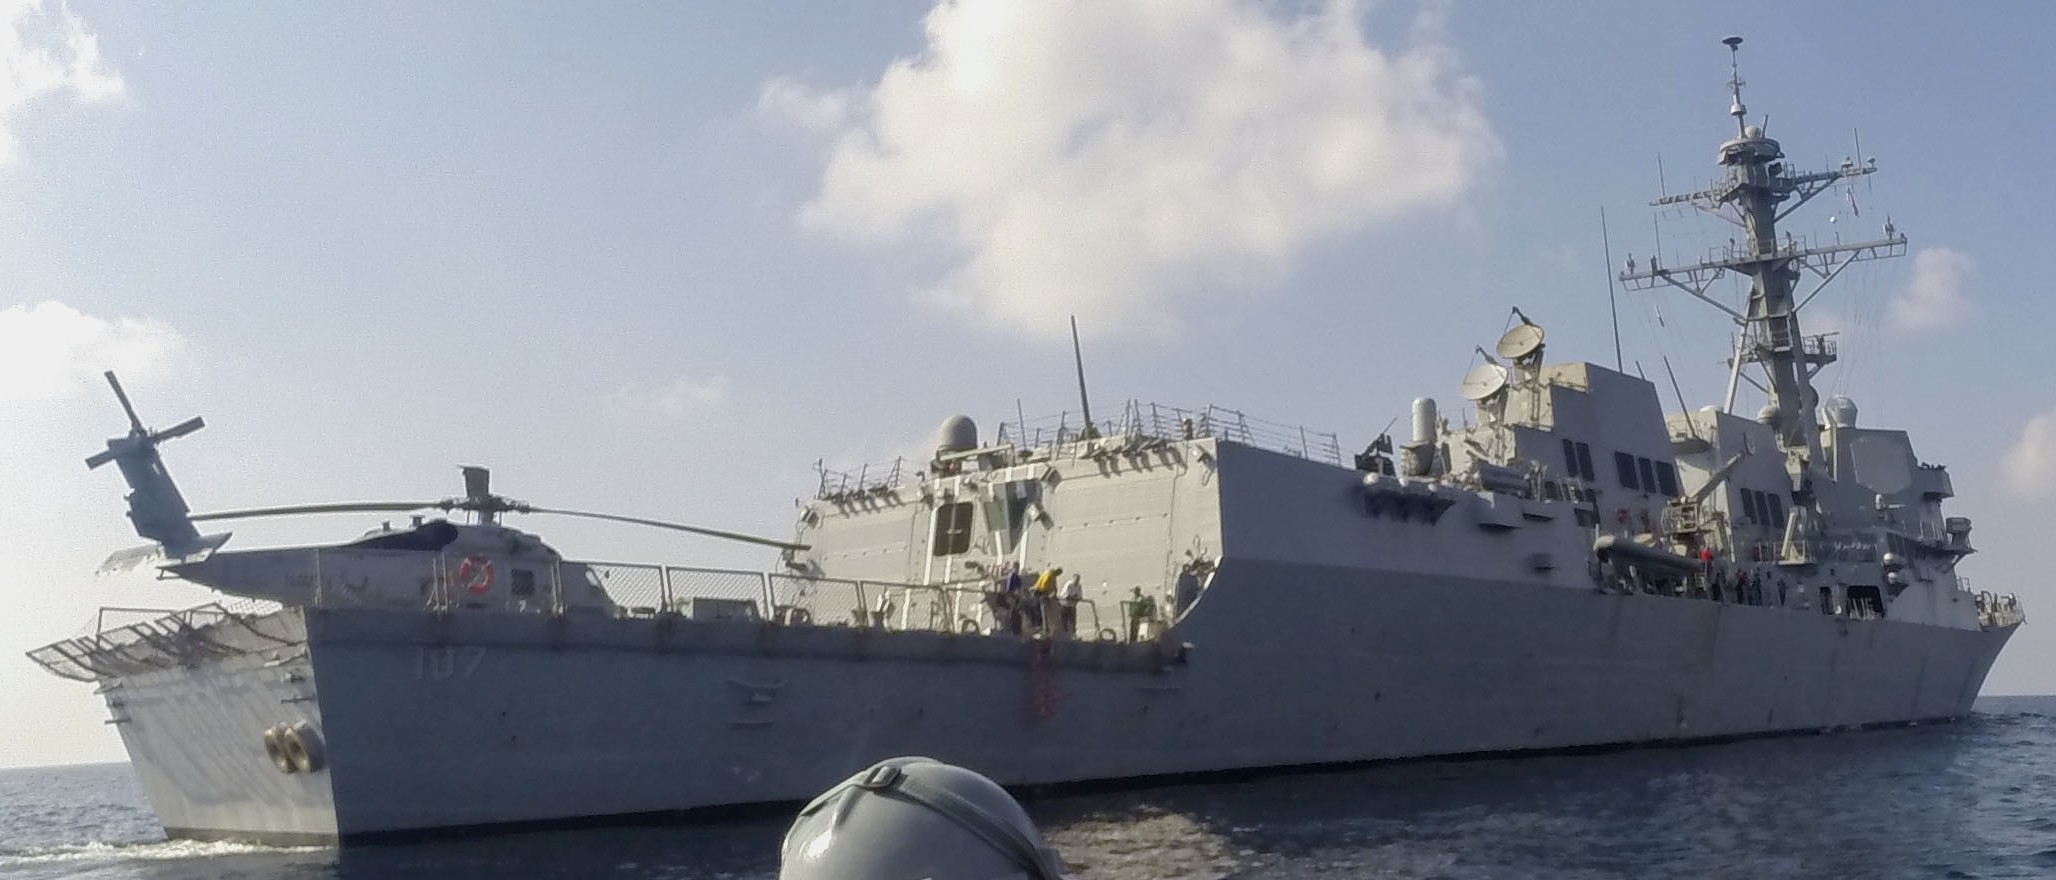 ddg-107 uss gravely arleigh burke class guided missile destroyer aegis us navy gulf of oman 22